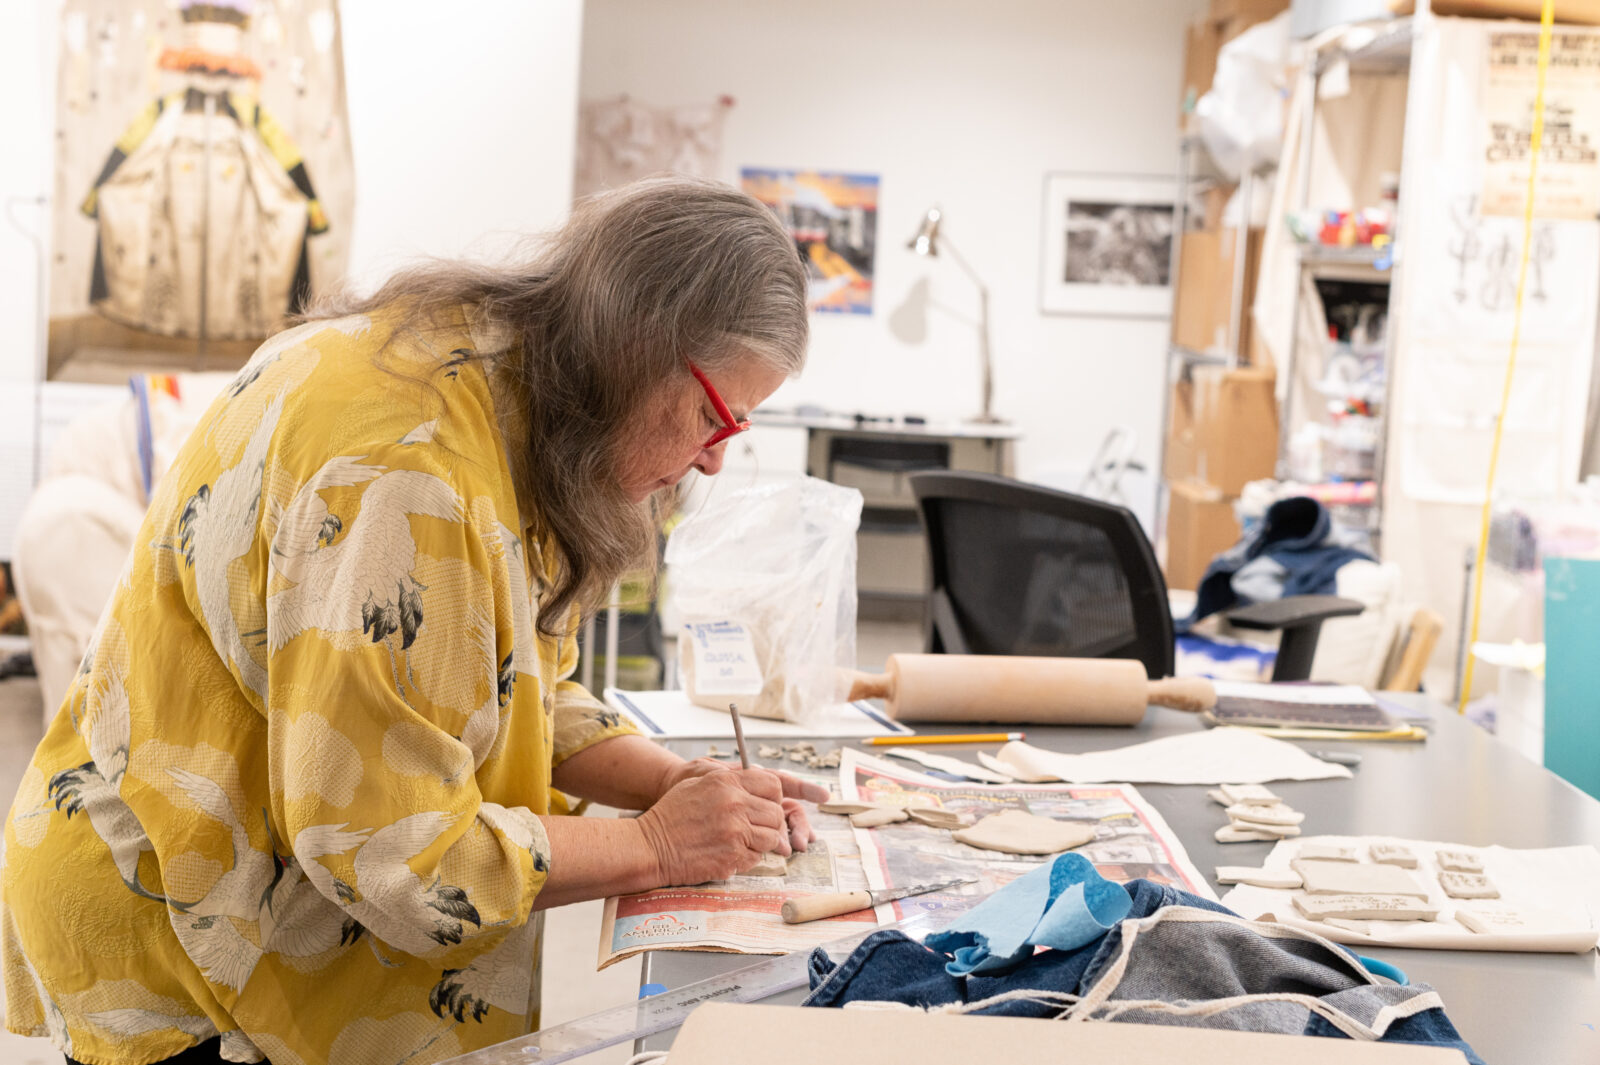 Pictured: Tulsa Artist Fellow Anita Fields in the studio. Photo by Dylan Johnson. Courtesy of the artists and Tulsa Artist Fellowship.